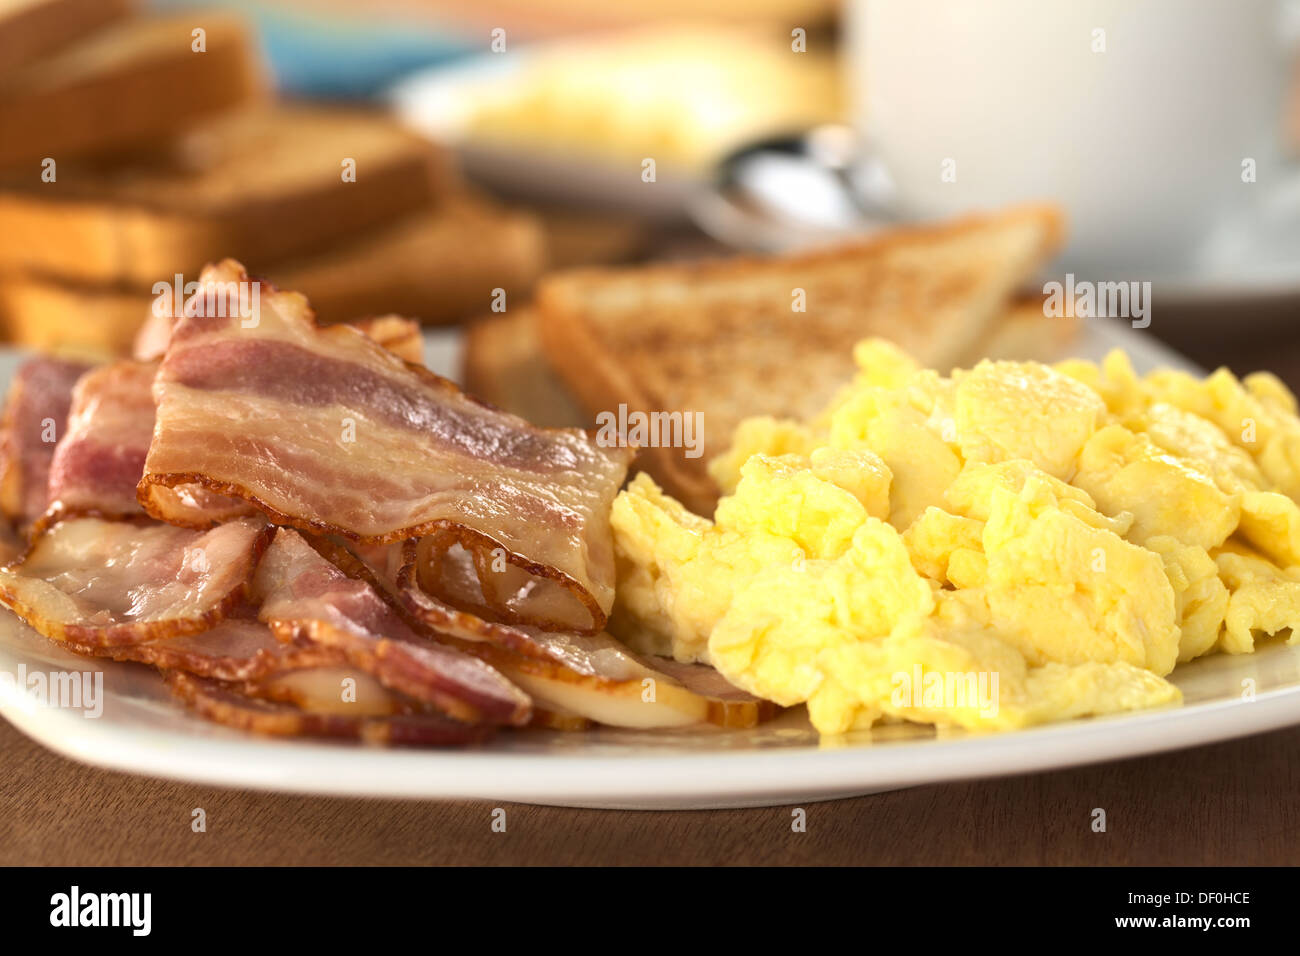 Fried Bacon And Scrambled Eggs With Toast Bread In The Back Selective Focus Focus On The Lower Edge Of The Bacon On Top Stock Photo Alamy